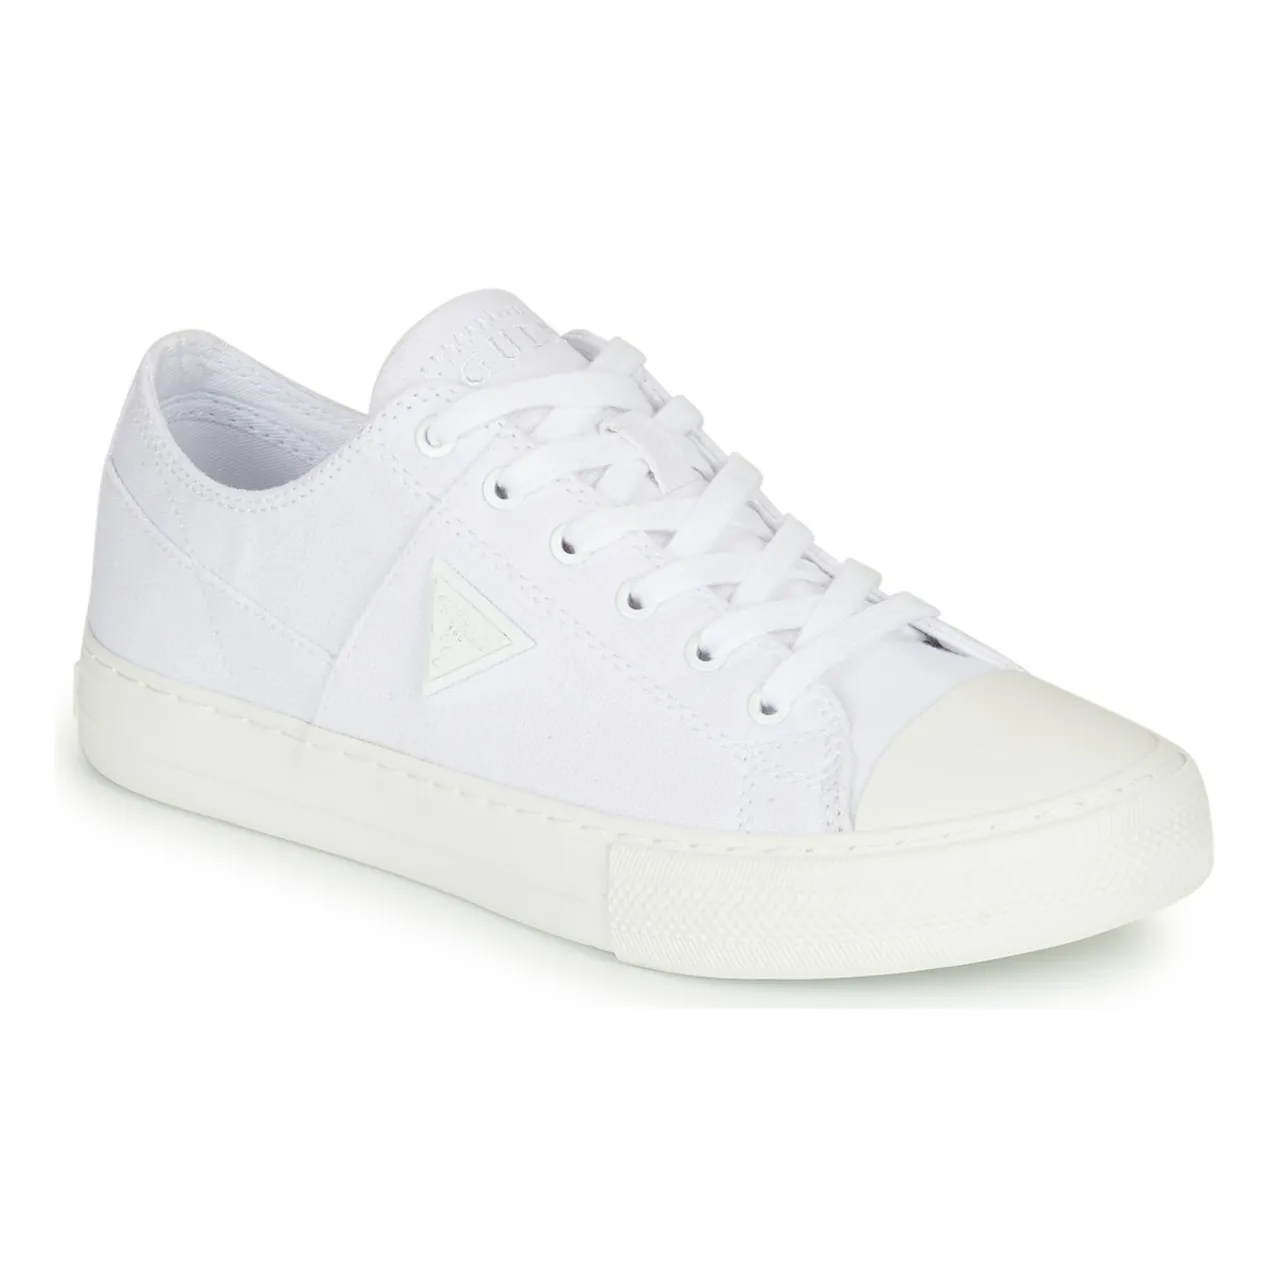 Guess  PRANZE  women's Shoes (Trainers) in White